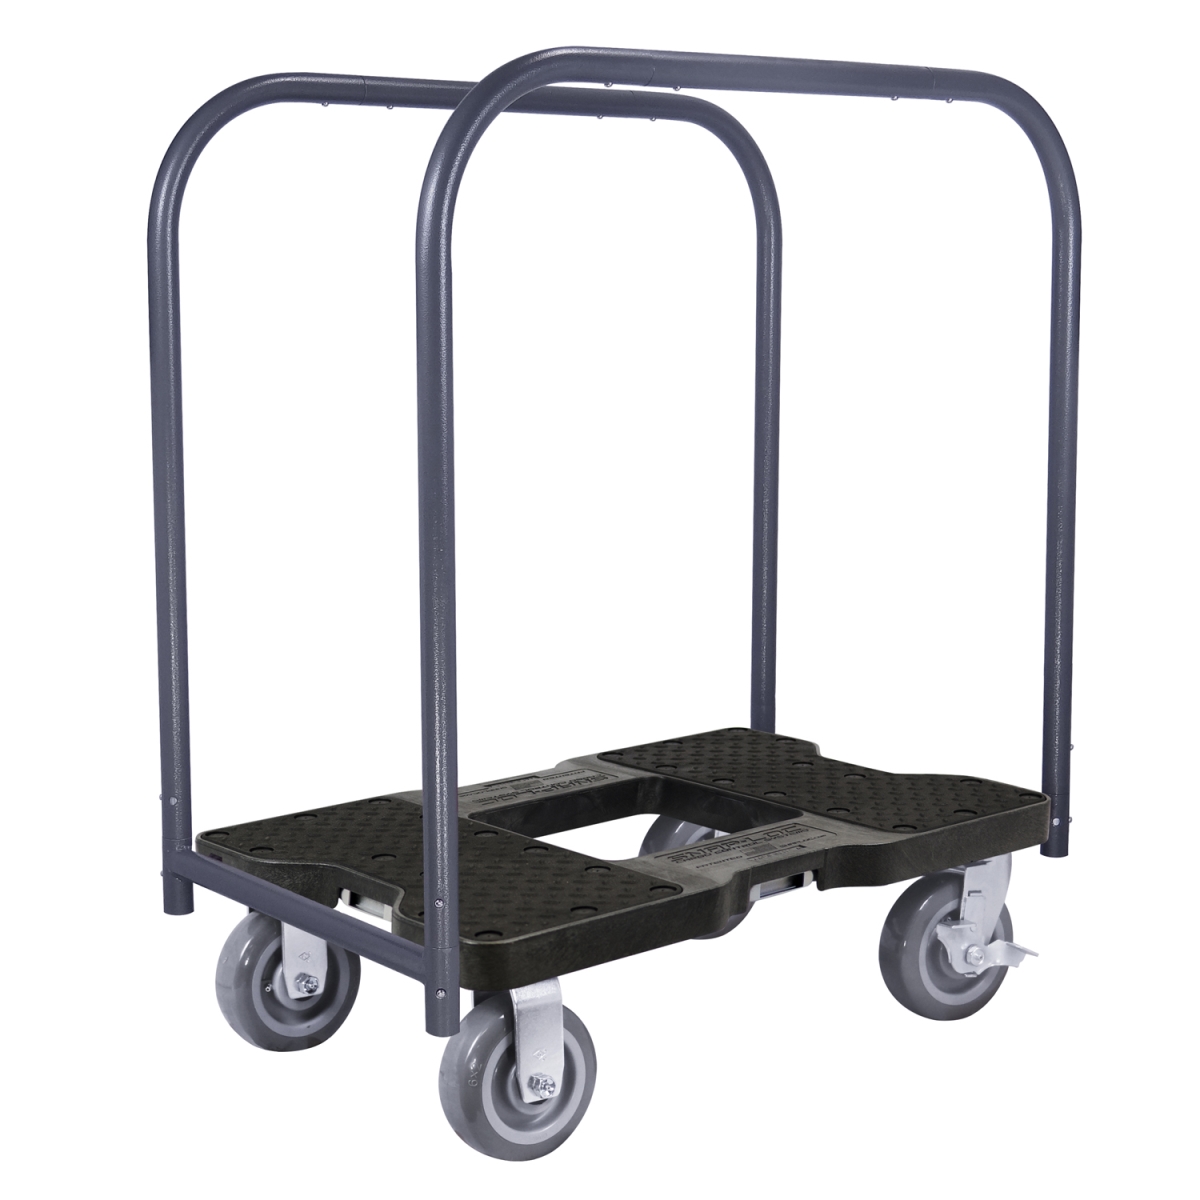 Picture of Snap-Loc SL1800PC6B 1800 lbs Super-Duty Professional E-Track Panel Cart Dolly - Black